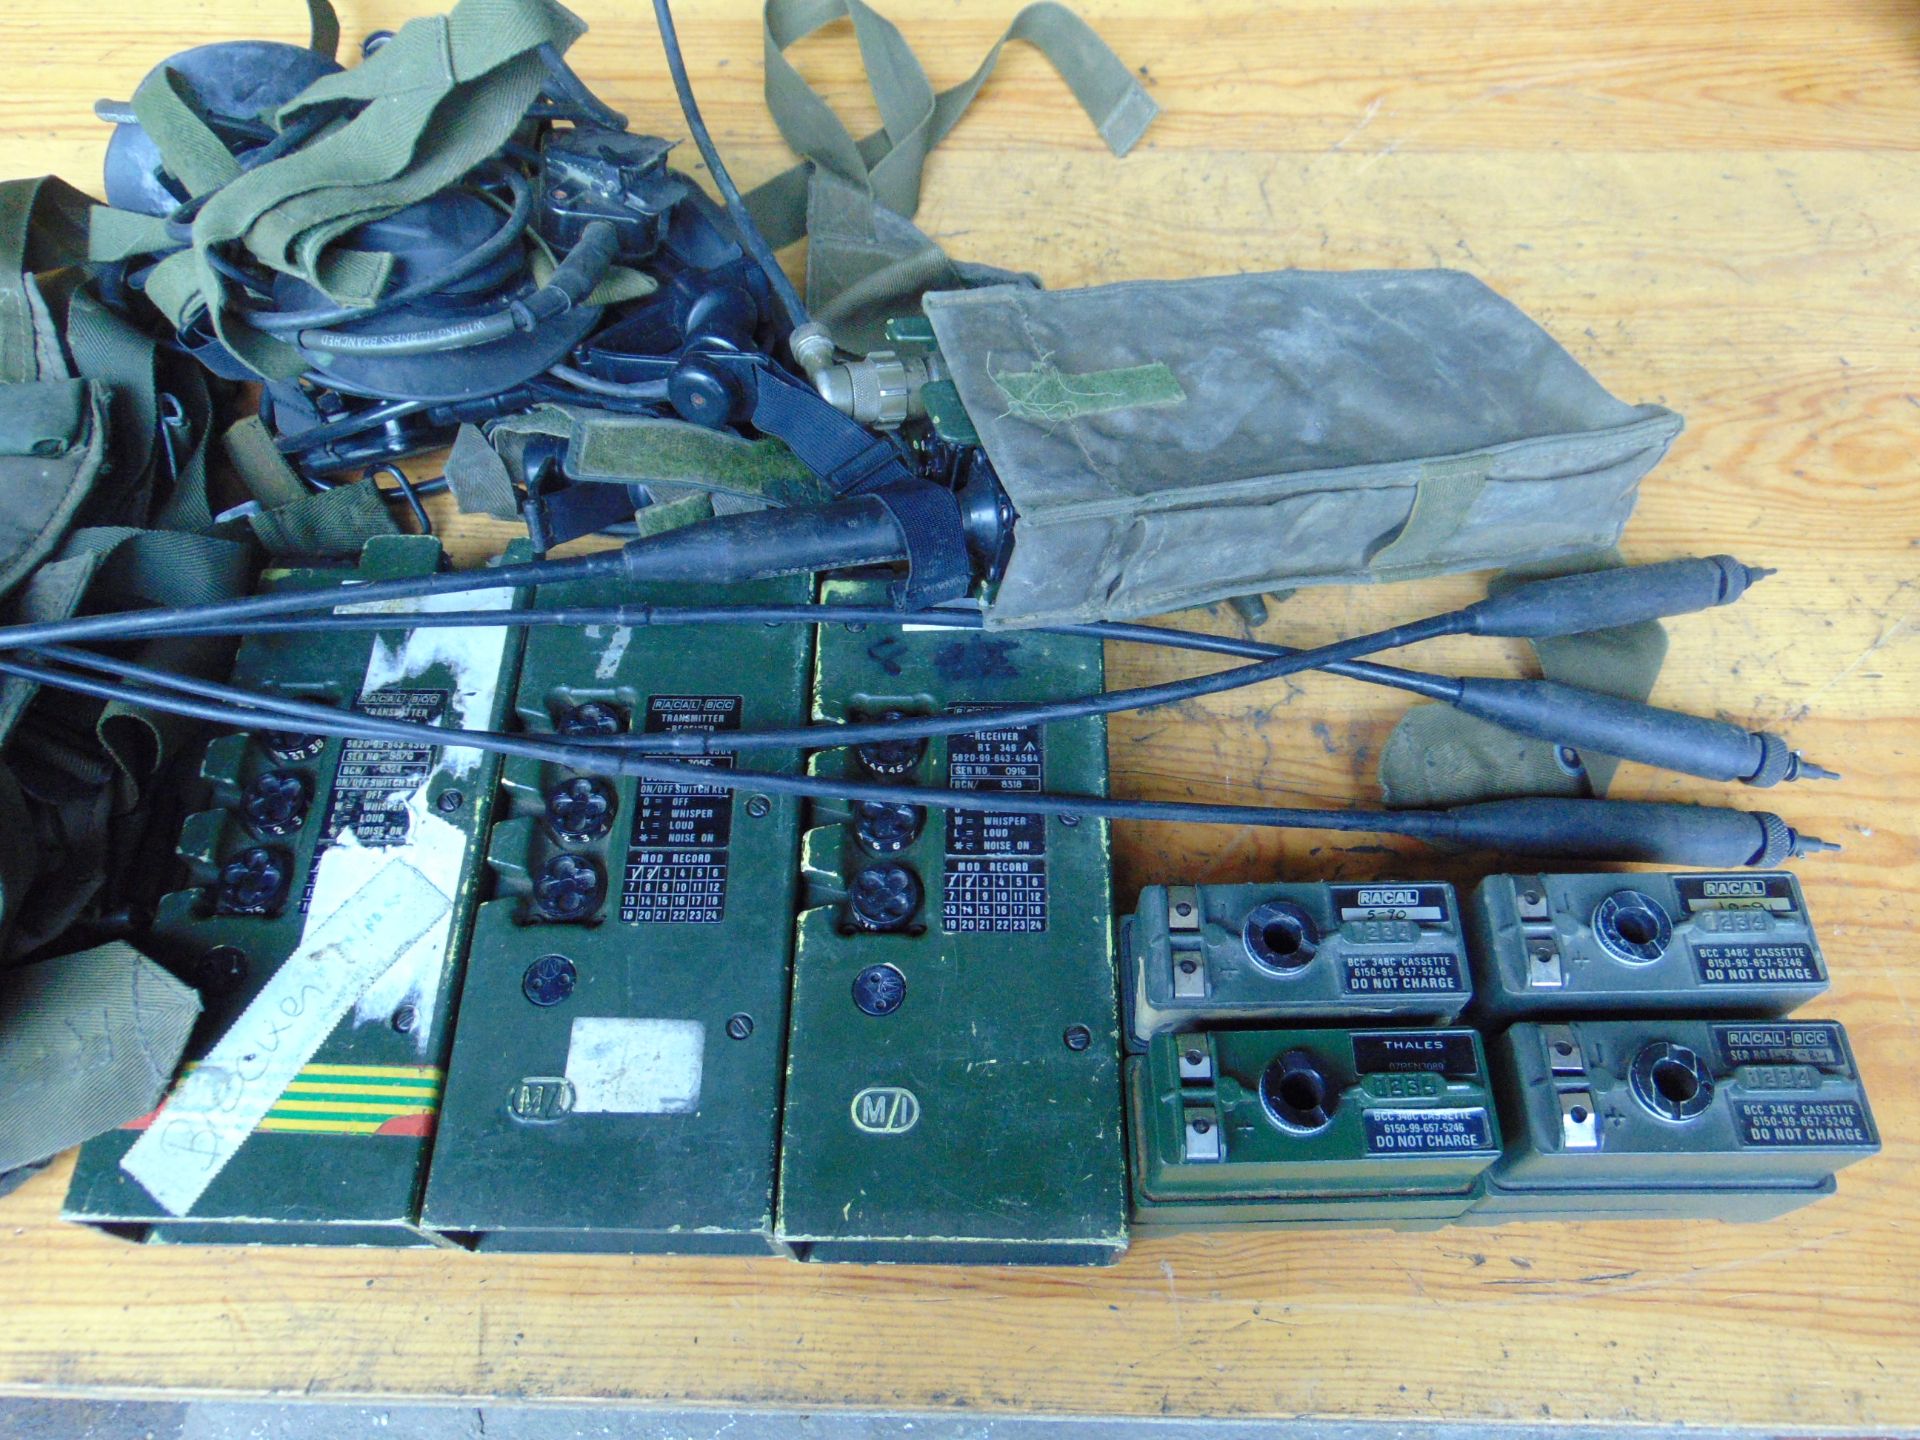 4 x UK / RT 349 Transmitter Receiver Complete as shown - Image 3 of 5